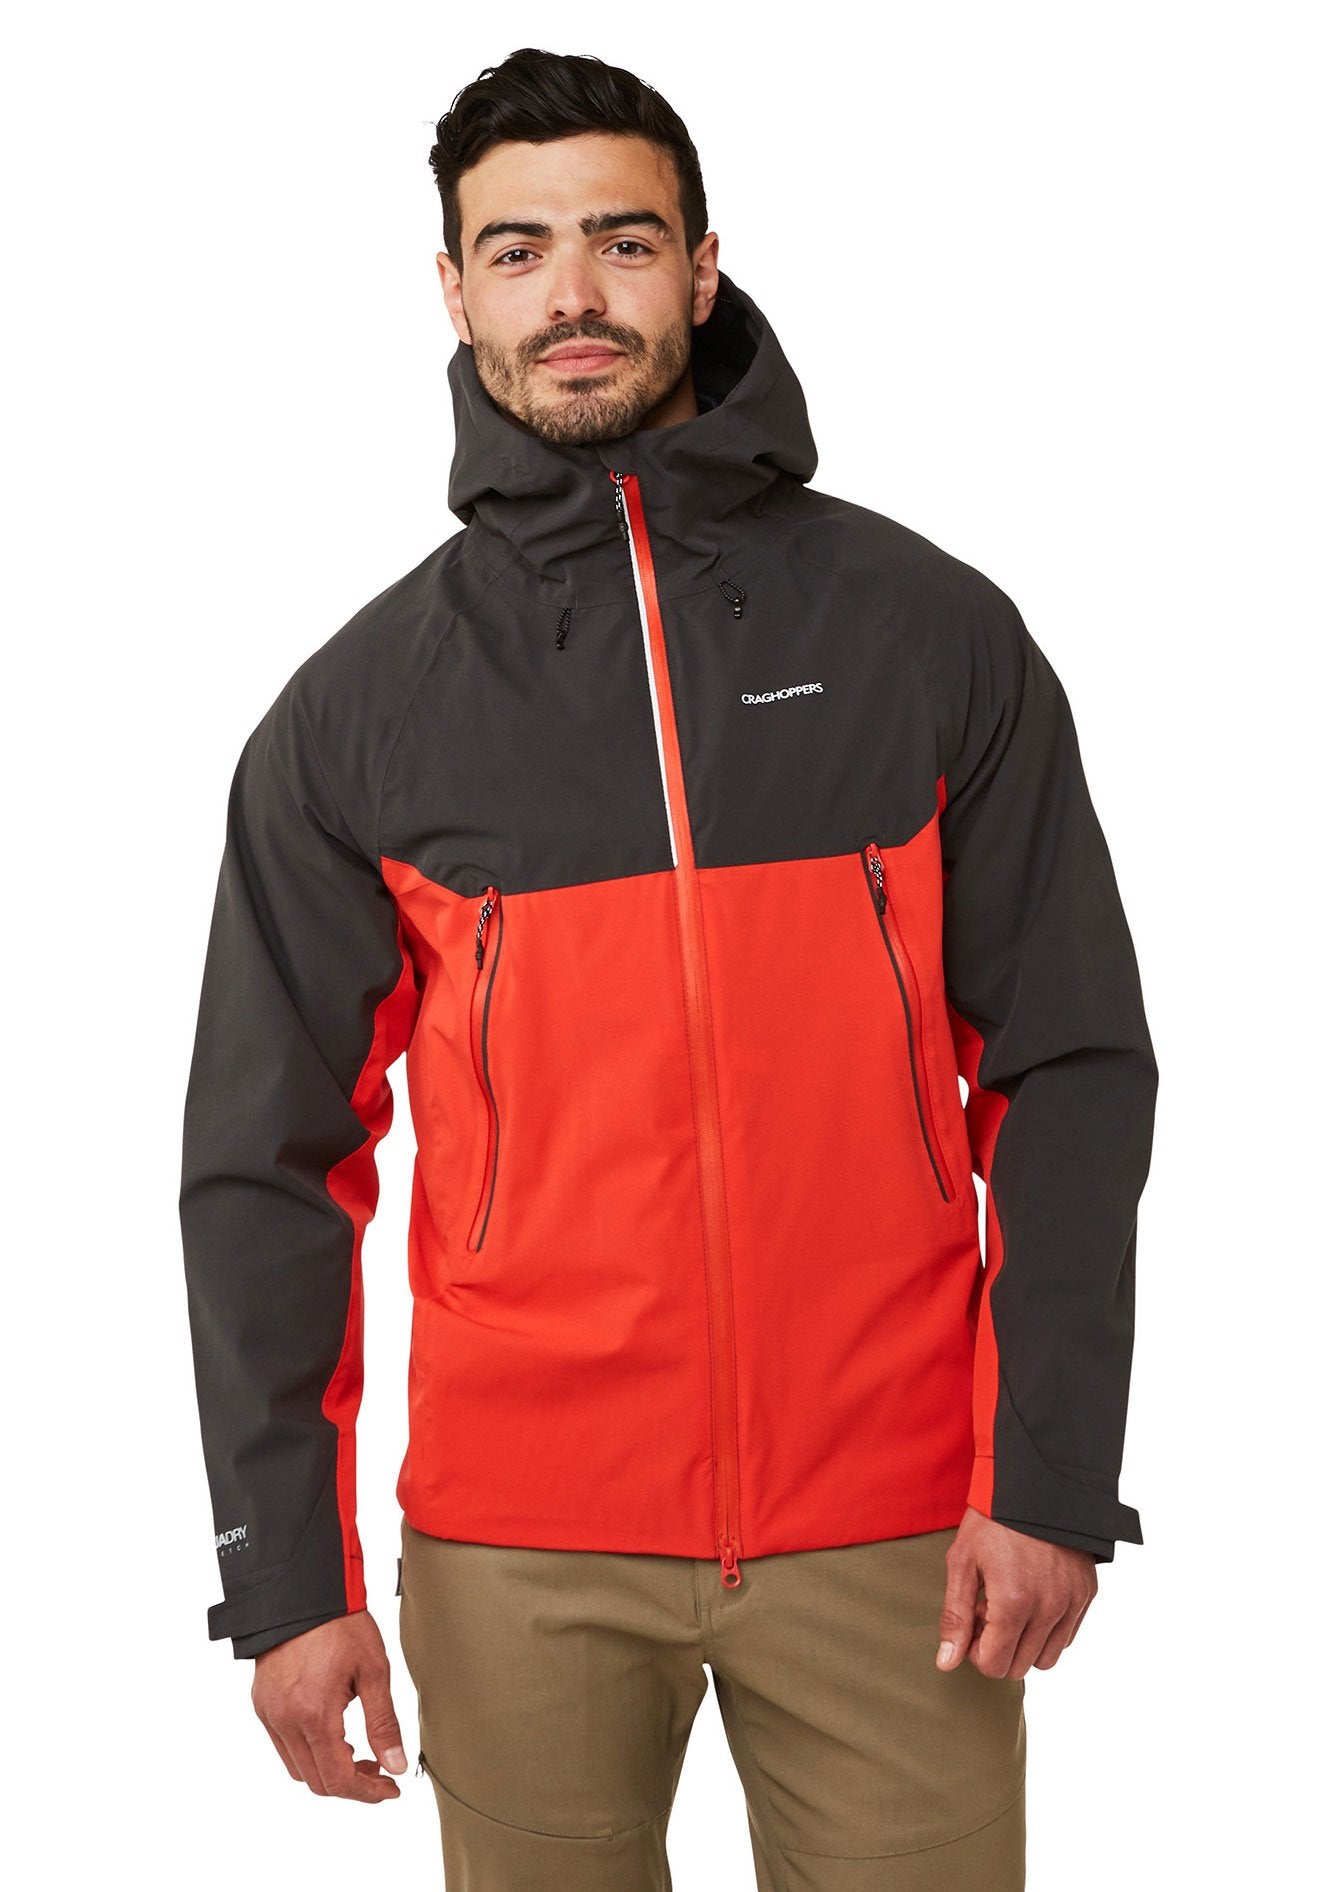 Trelawney Waterproof Breathable Jacket by Craghoppers Black and Red